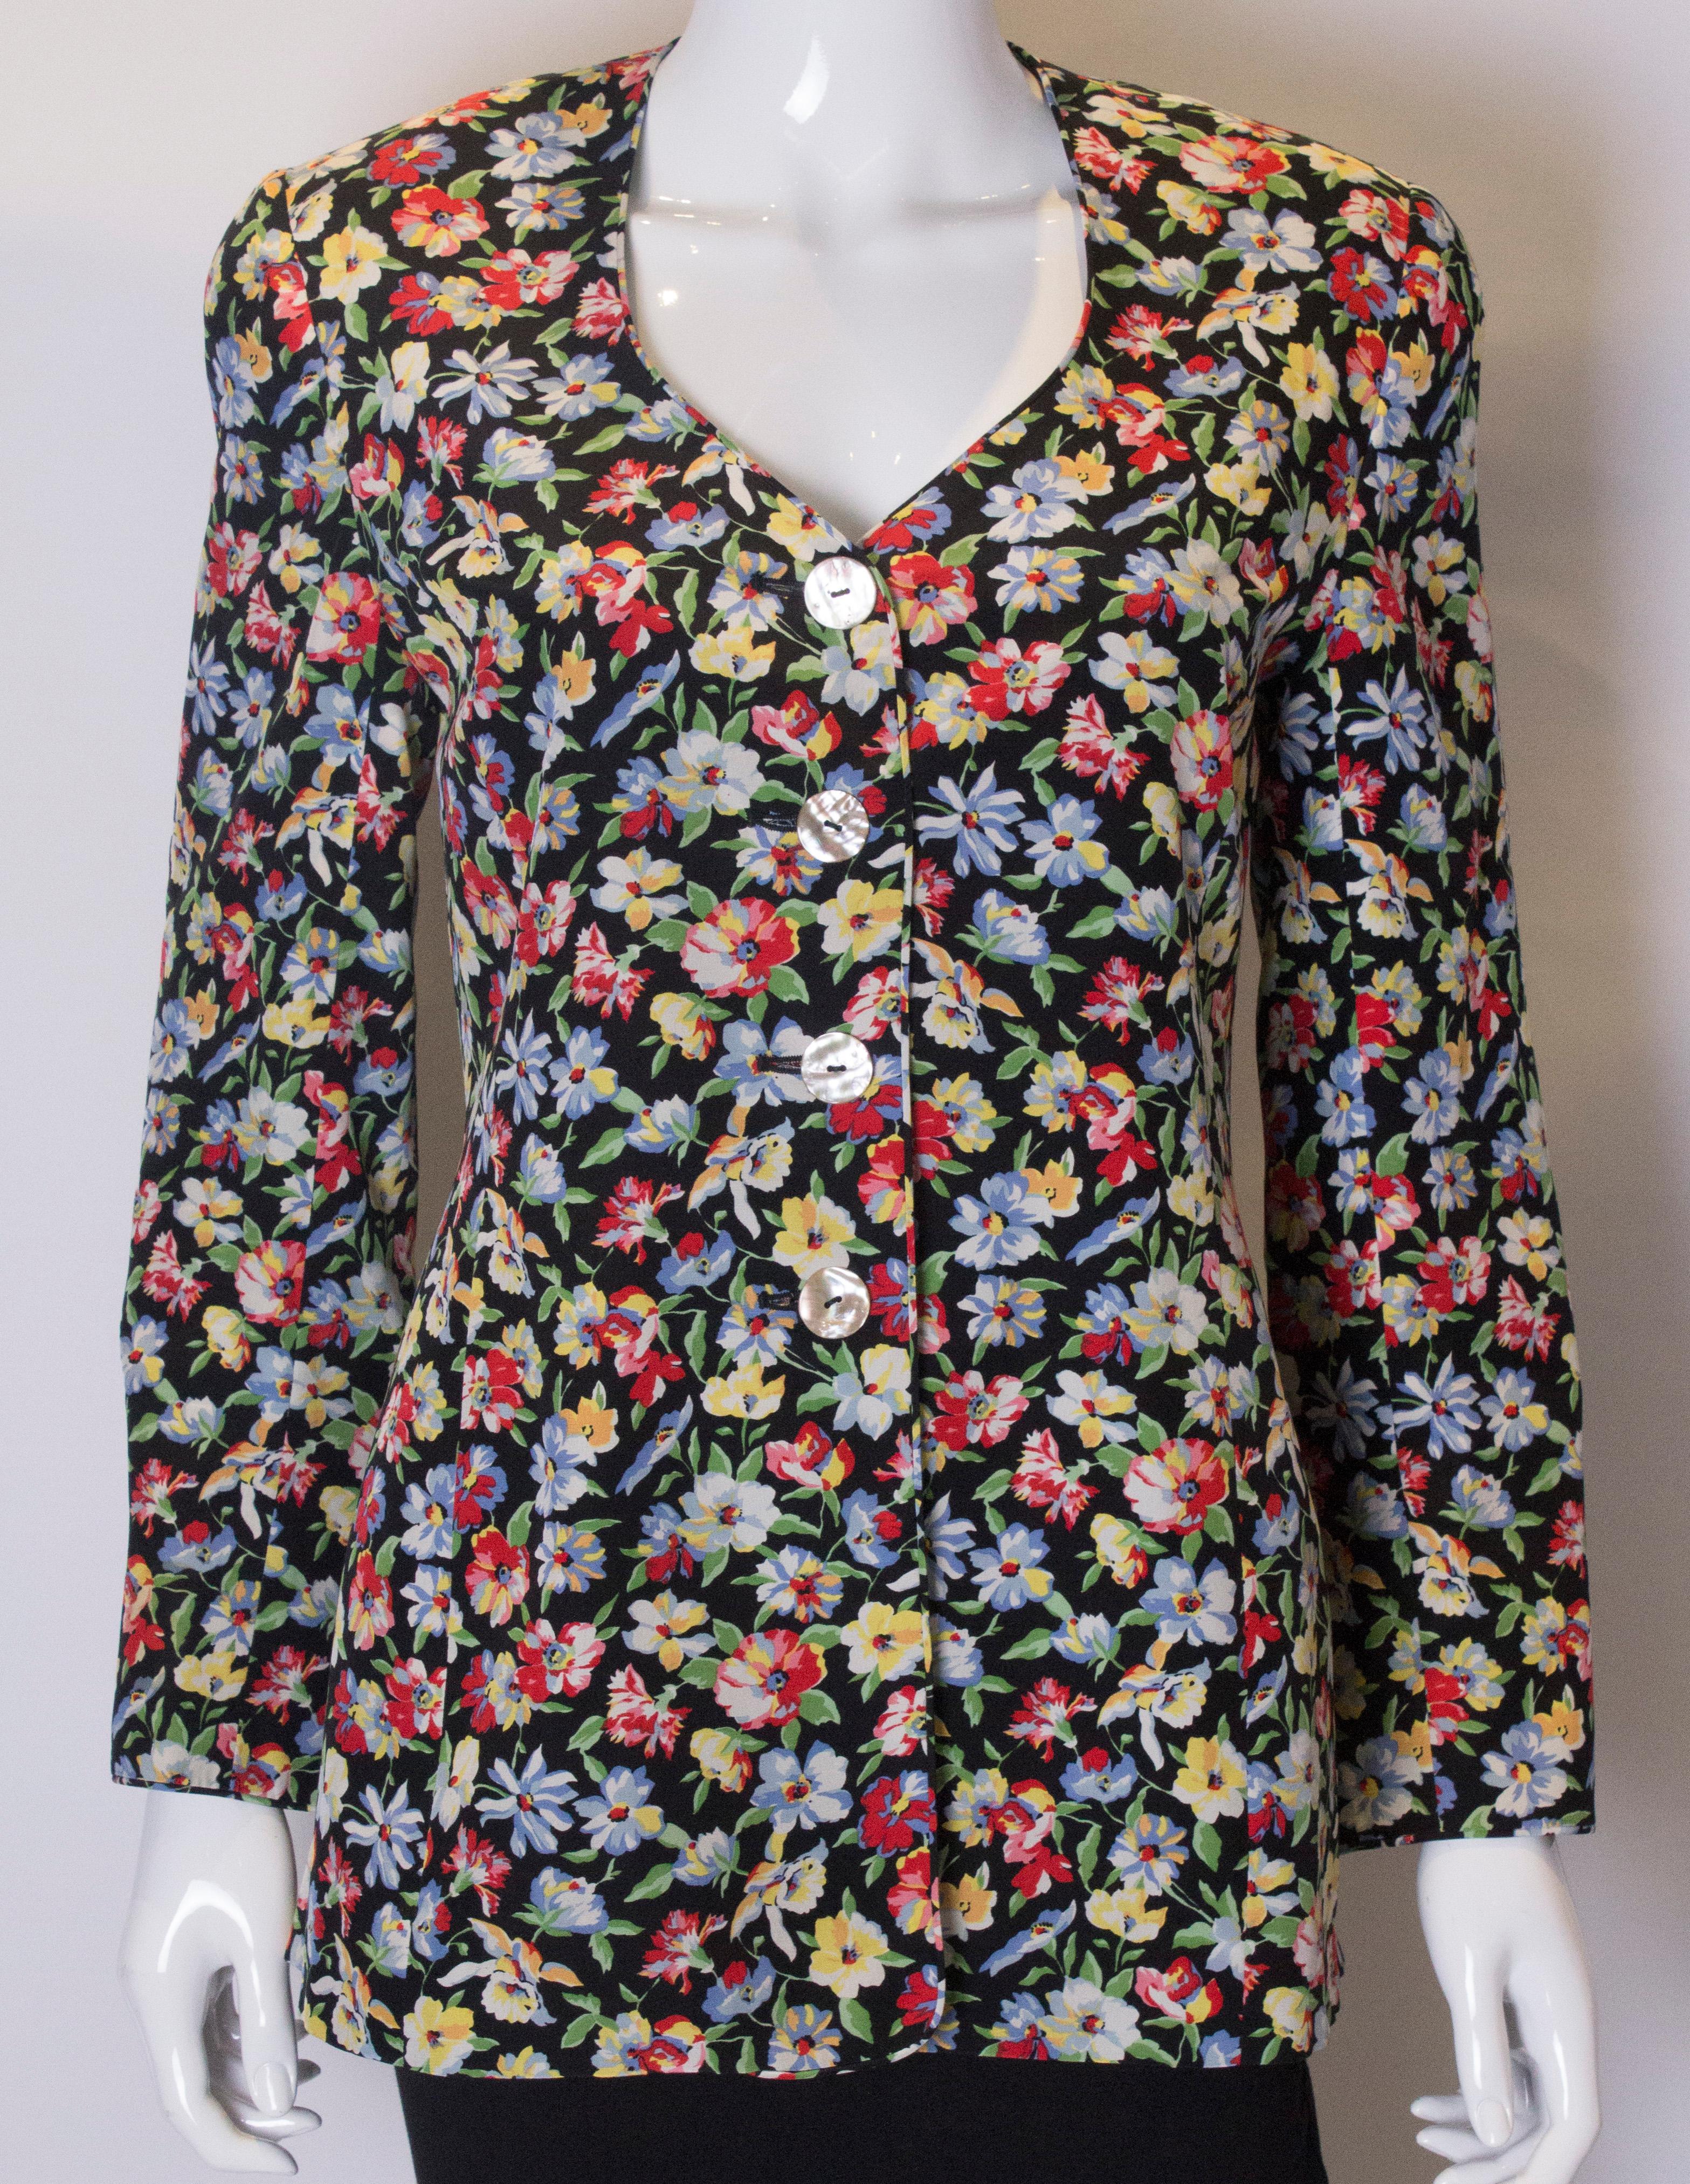 A chic floral silk jacket by Caroline Charles . The jacket has a v neckline with a four button opening It has interesting curved cuffs , and is fully lined.